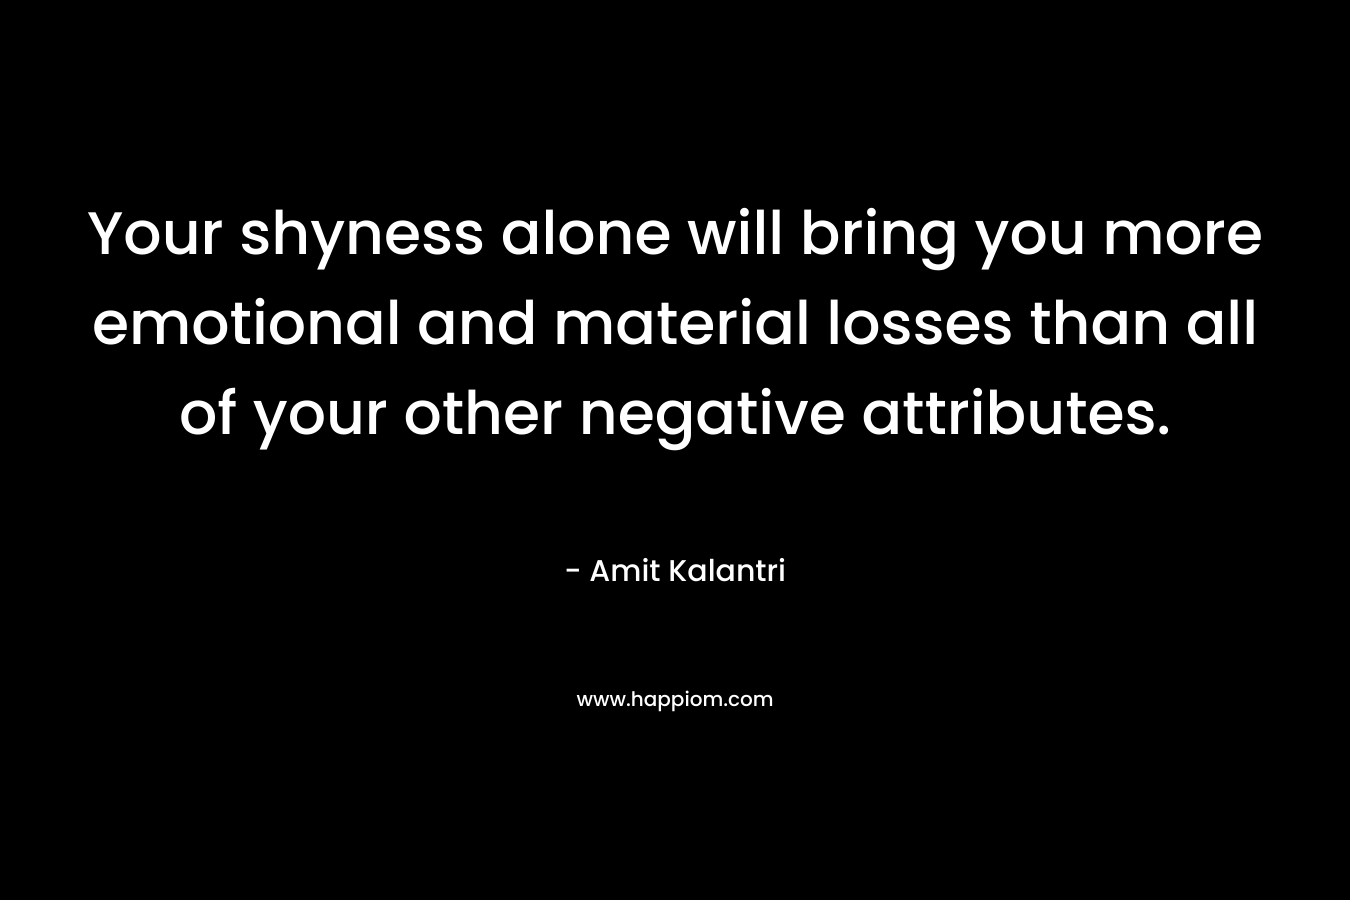 Your shyness alone will bring you more emotional and material losses than all of your other negative attributes.